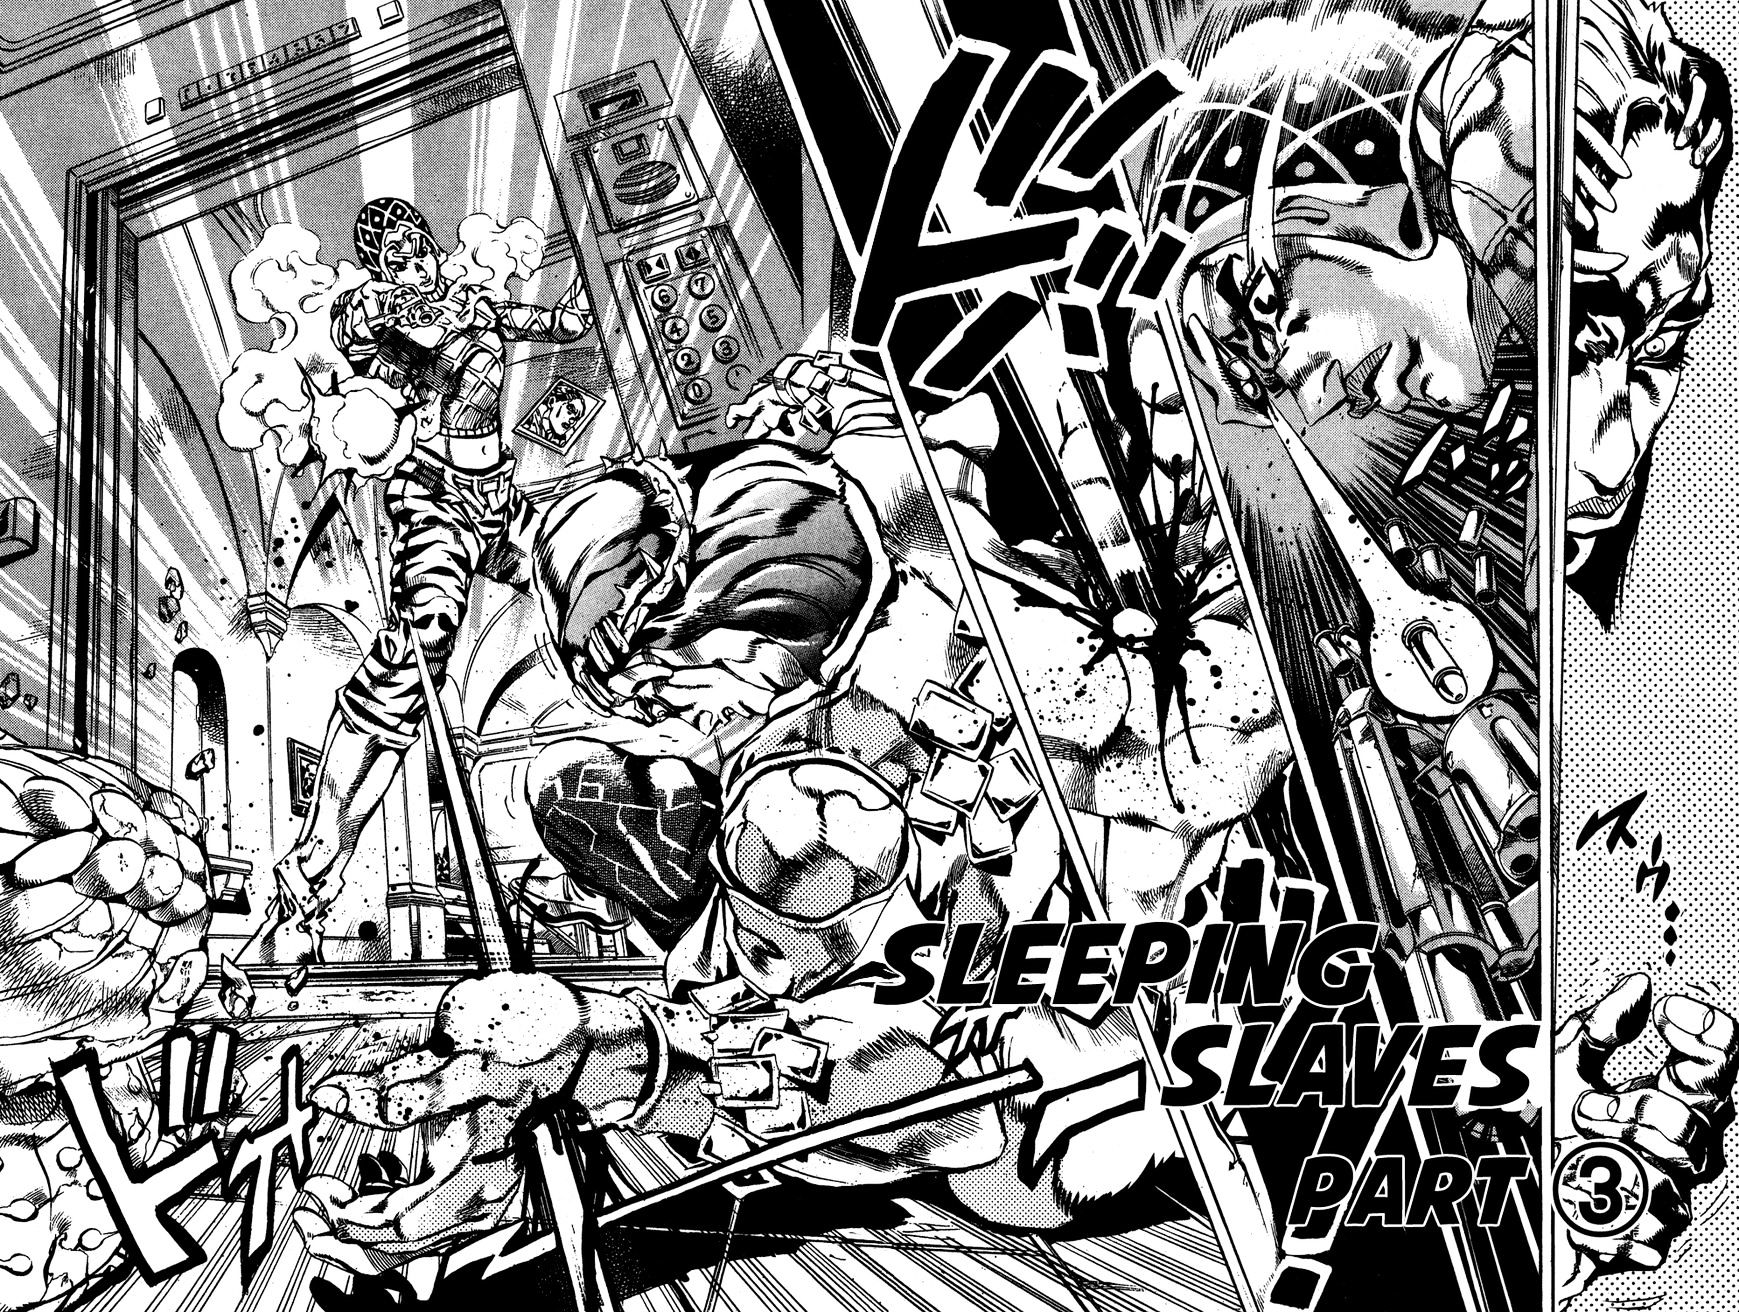 Vento Aureo Chapter 592 : Sleeping Slaves - Part 3 - Picture 3